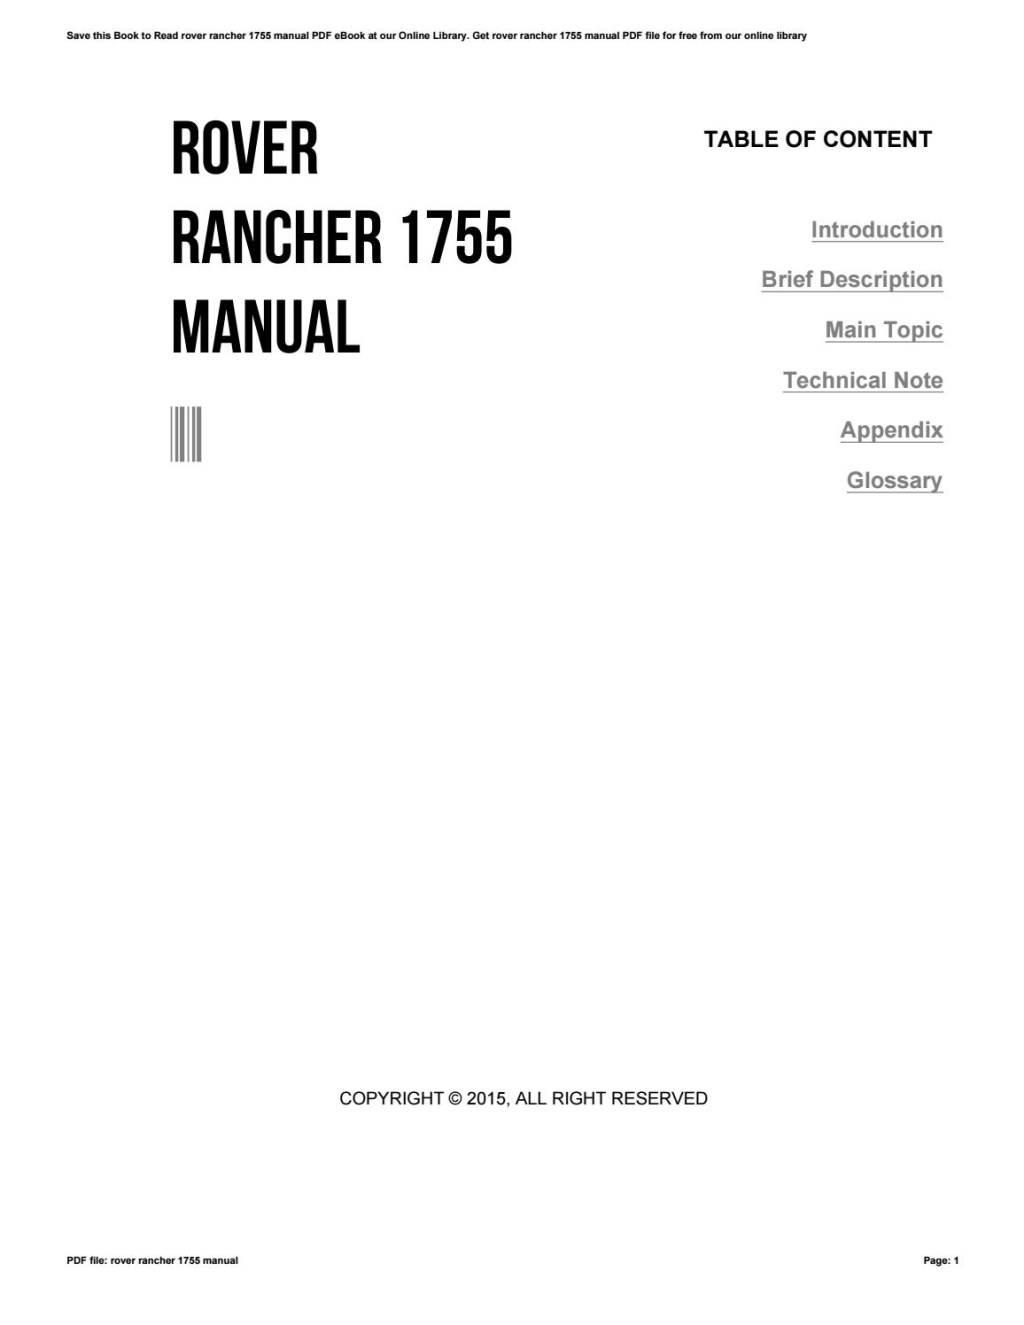 Picture of: Rover rancher  manual by mail – Issuu